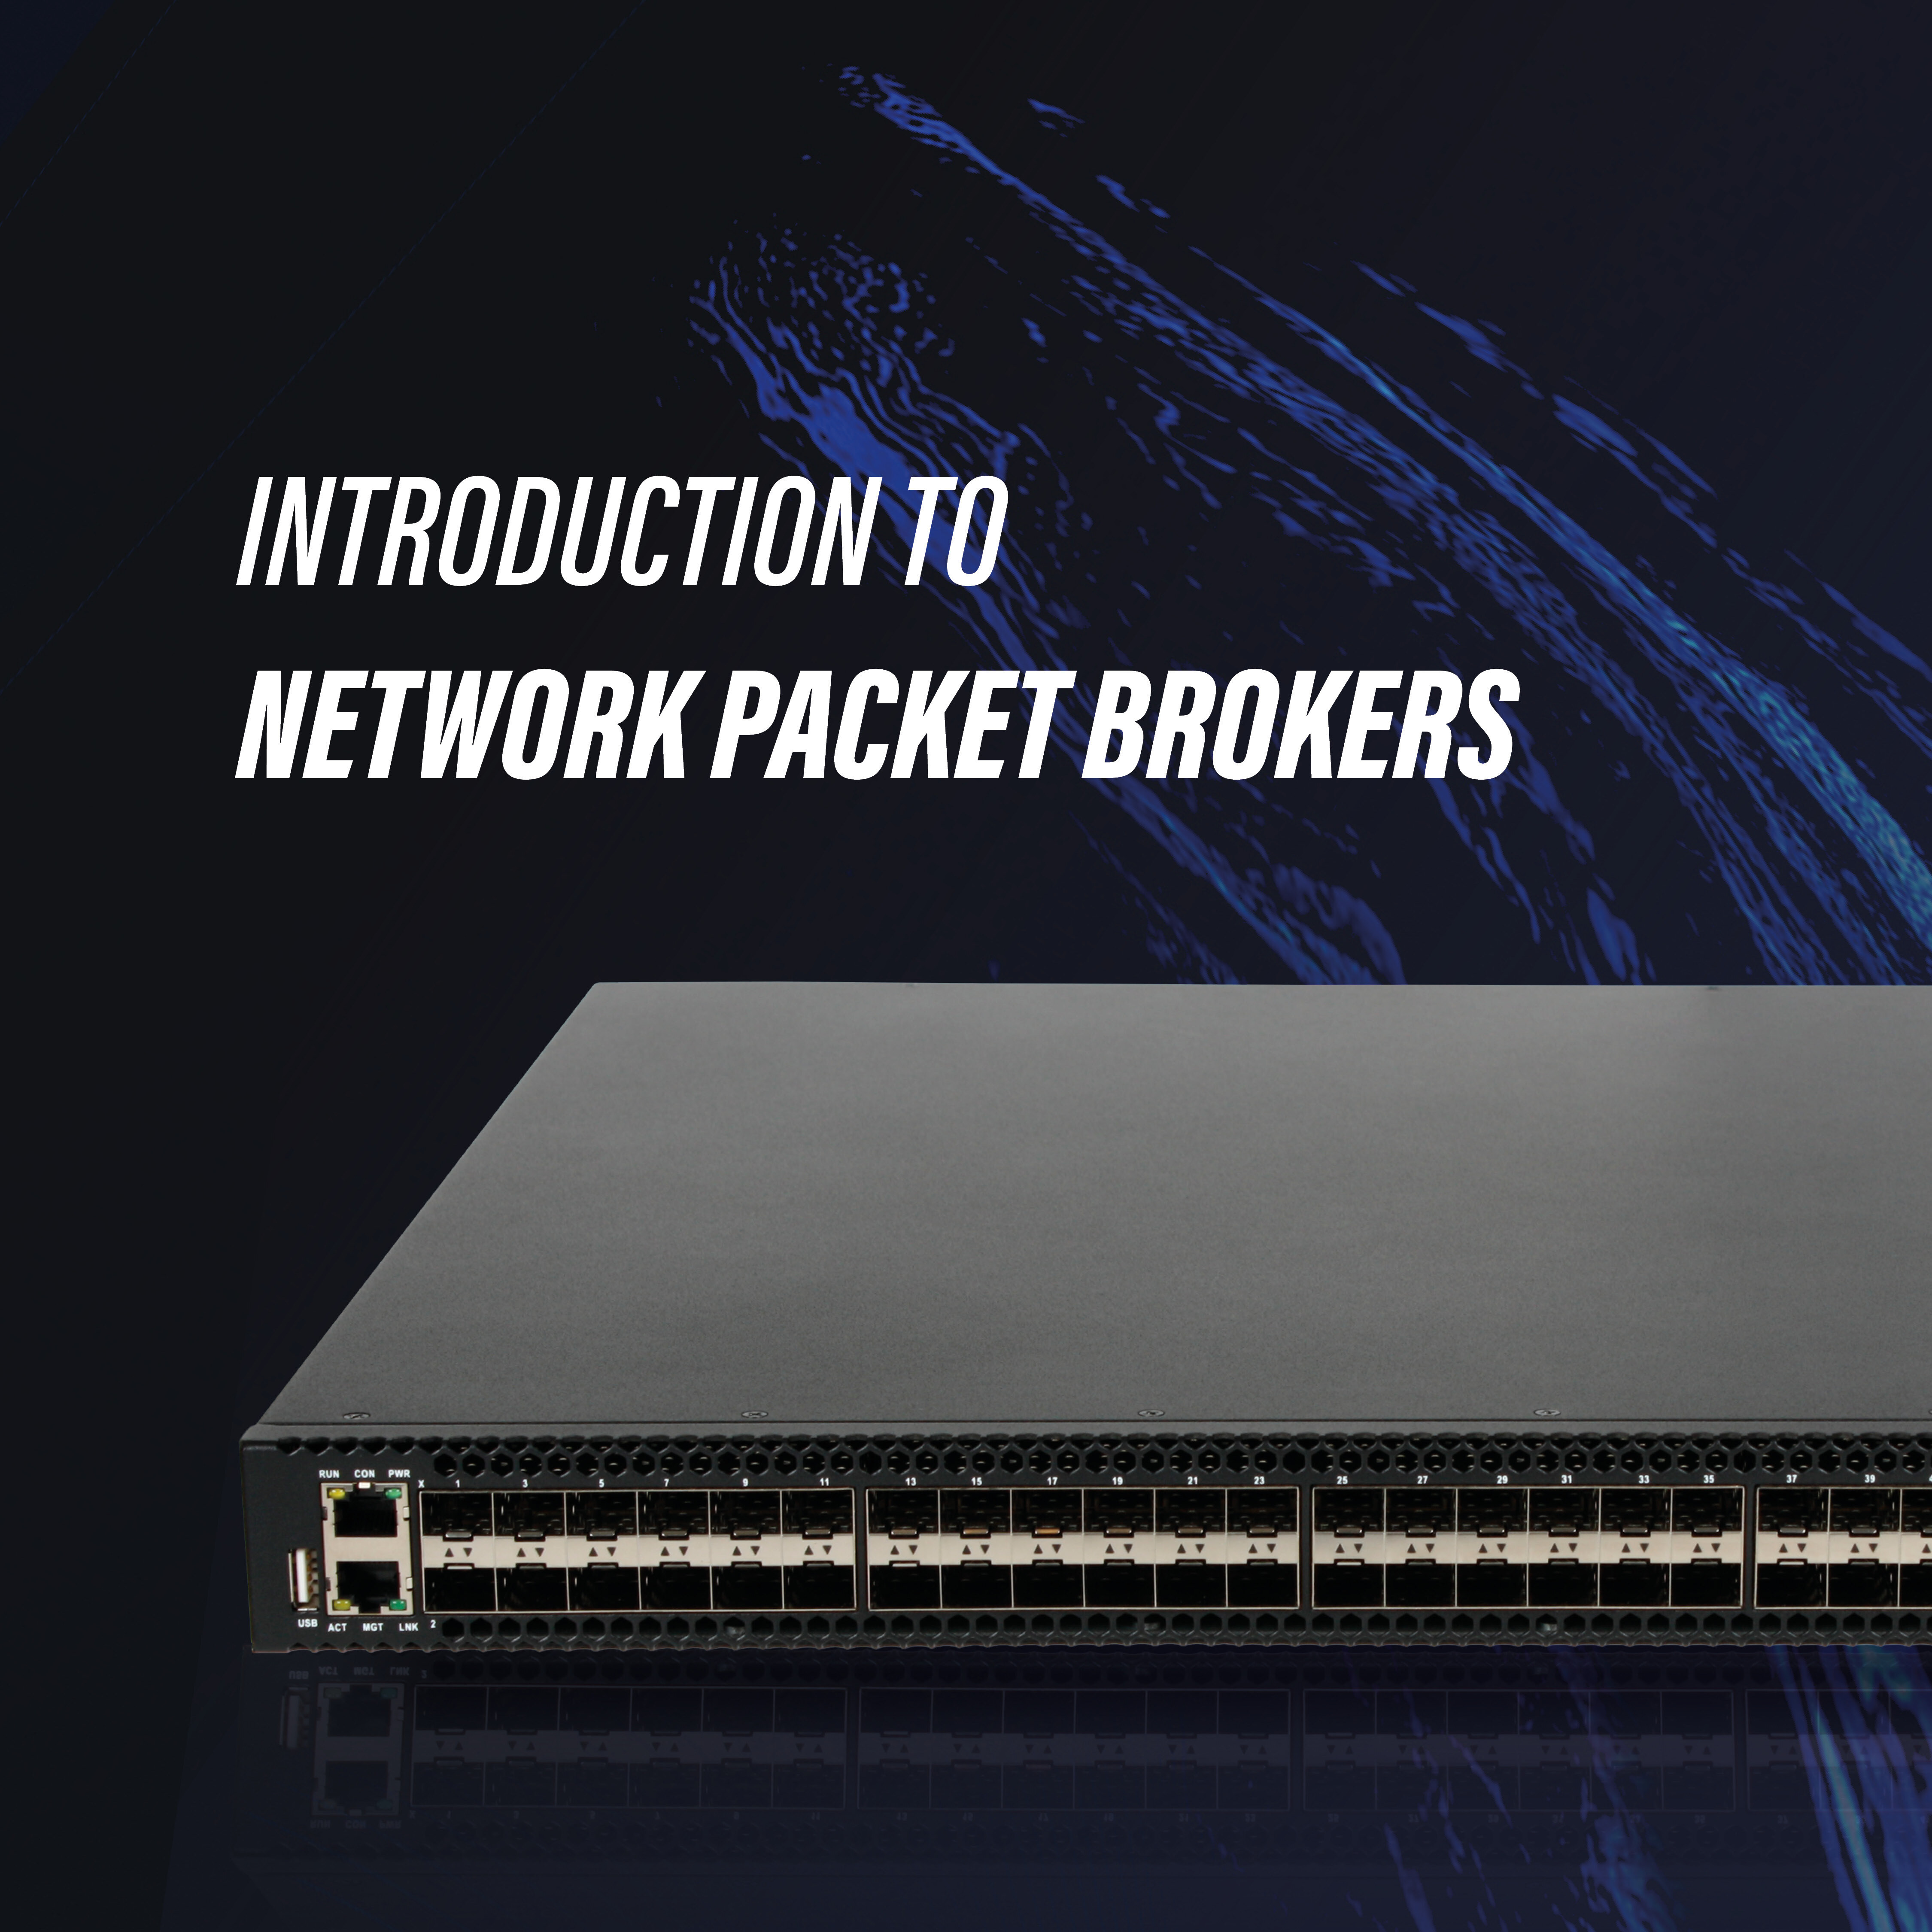 Introduction to Network Packet Brokers